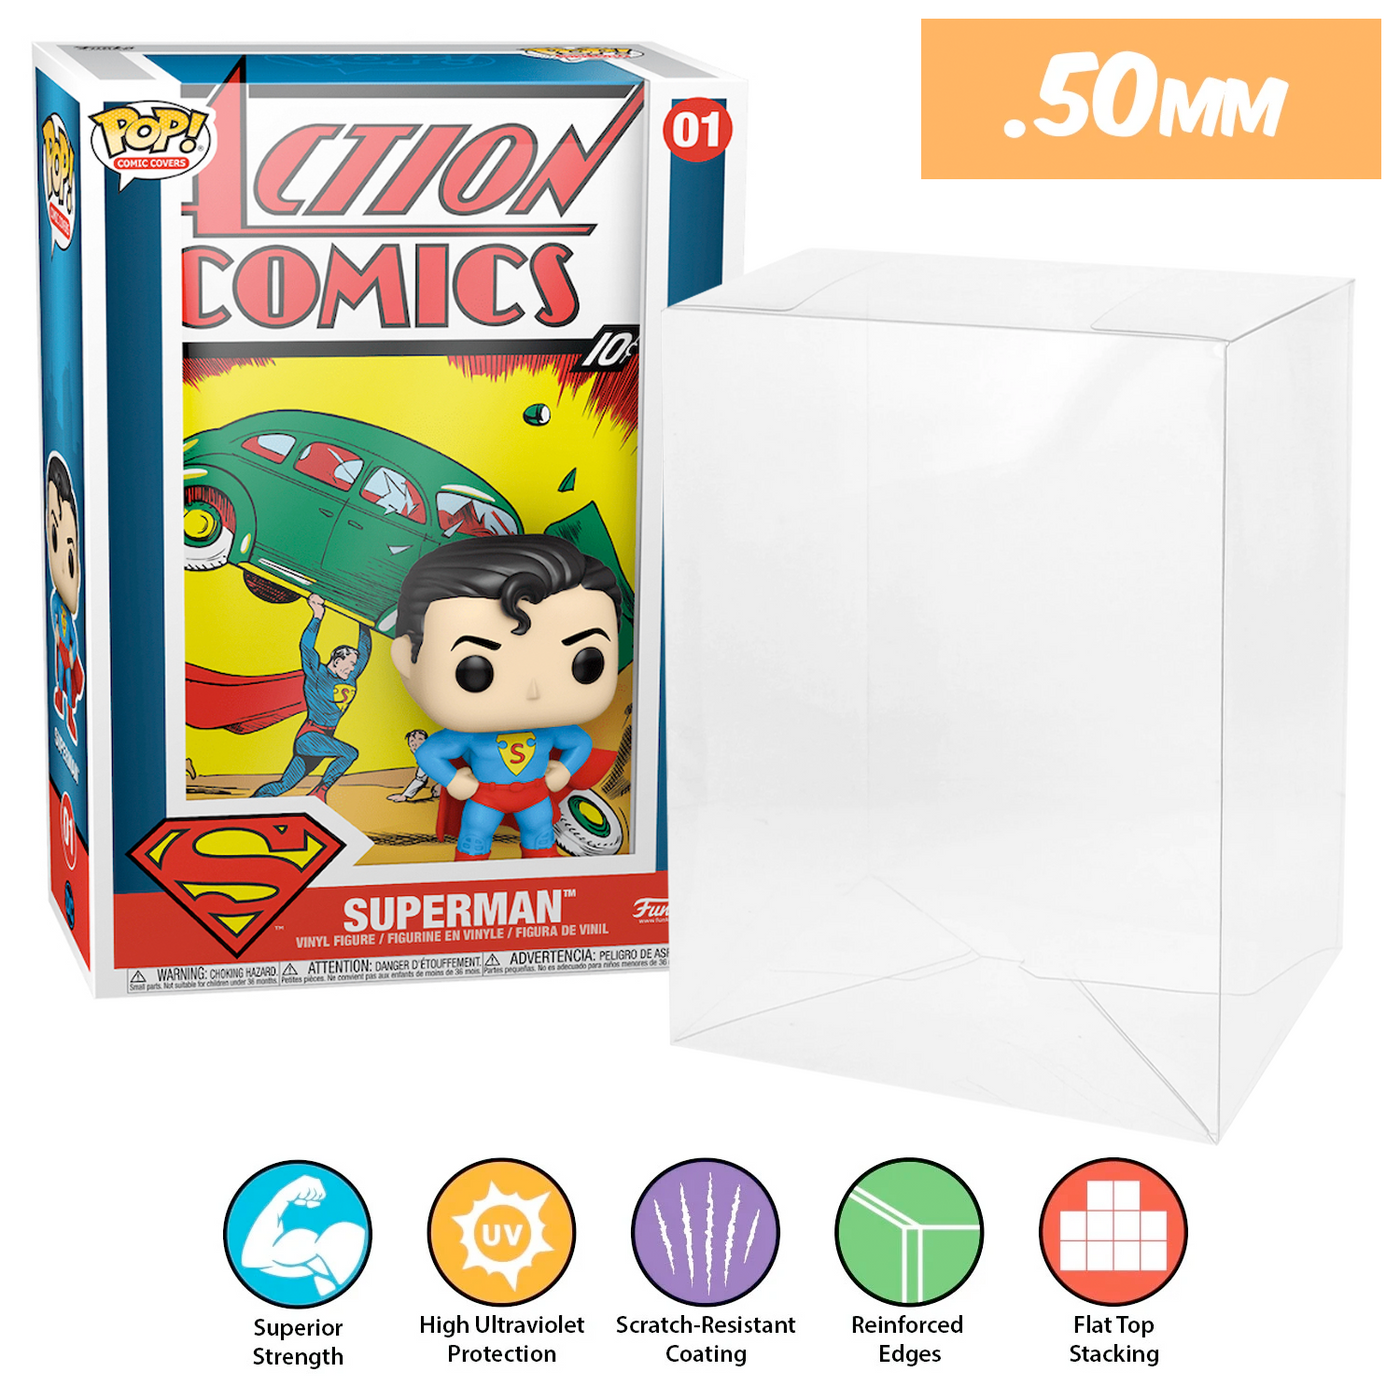 dc superman action pop comic covers best funko pop protectors thick strong uv scratch flat top stack vinyl display geek plastic shield vaulted eco armor fits collect protect display case kollector protector